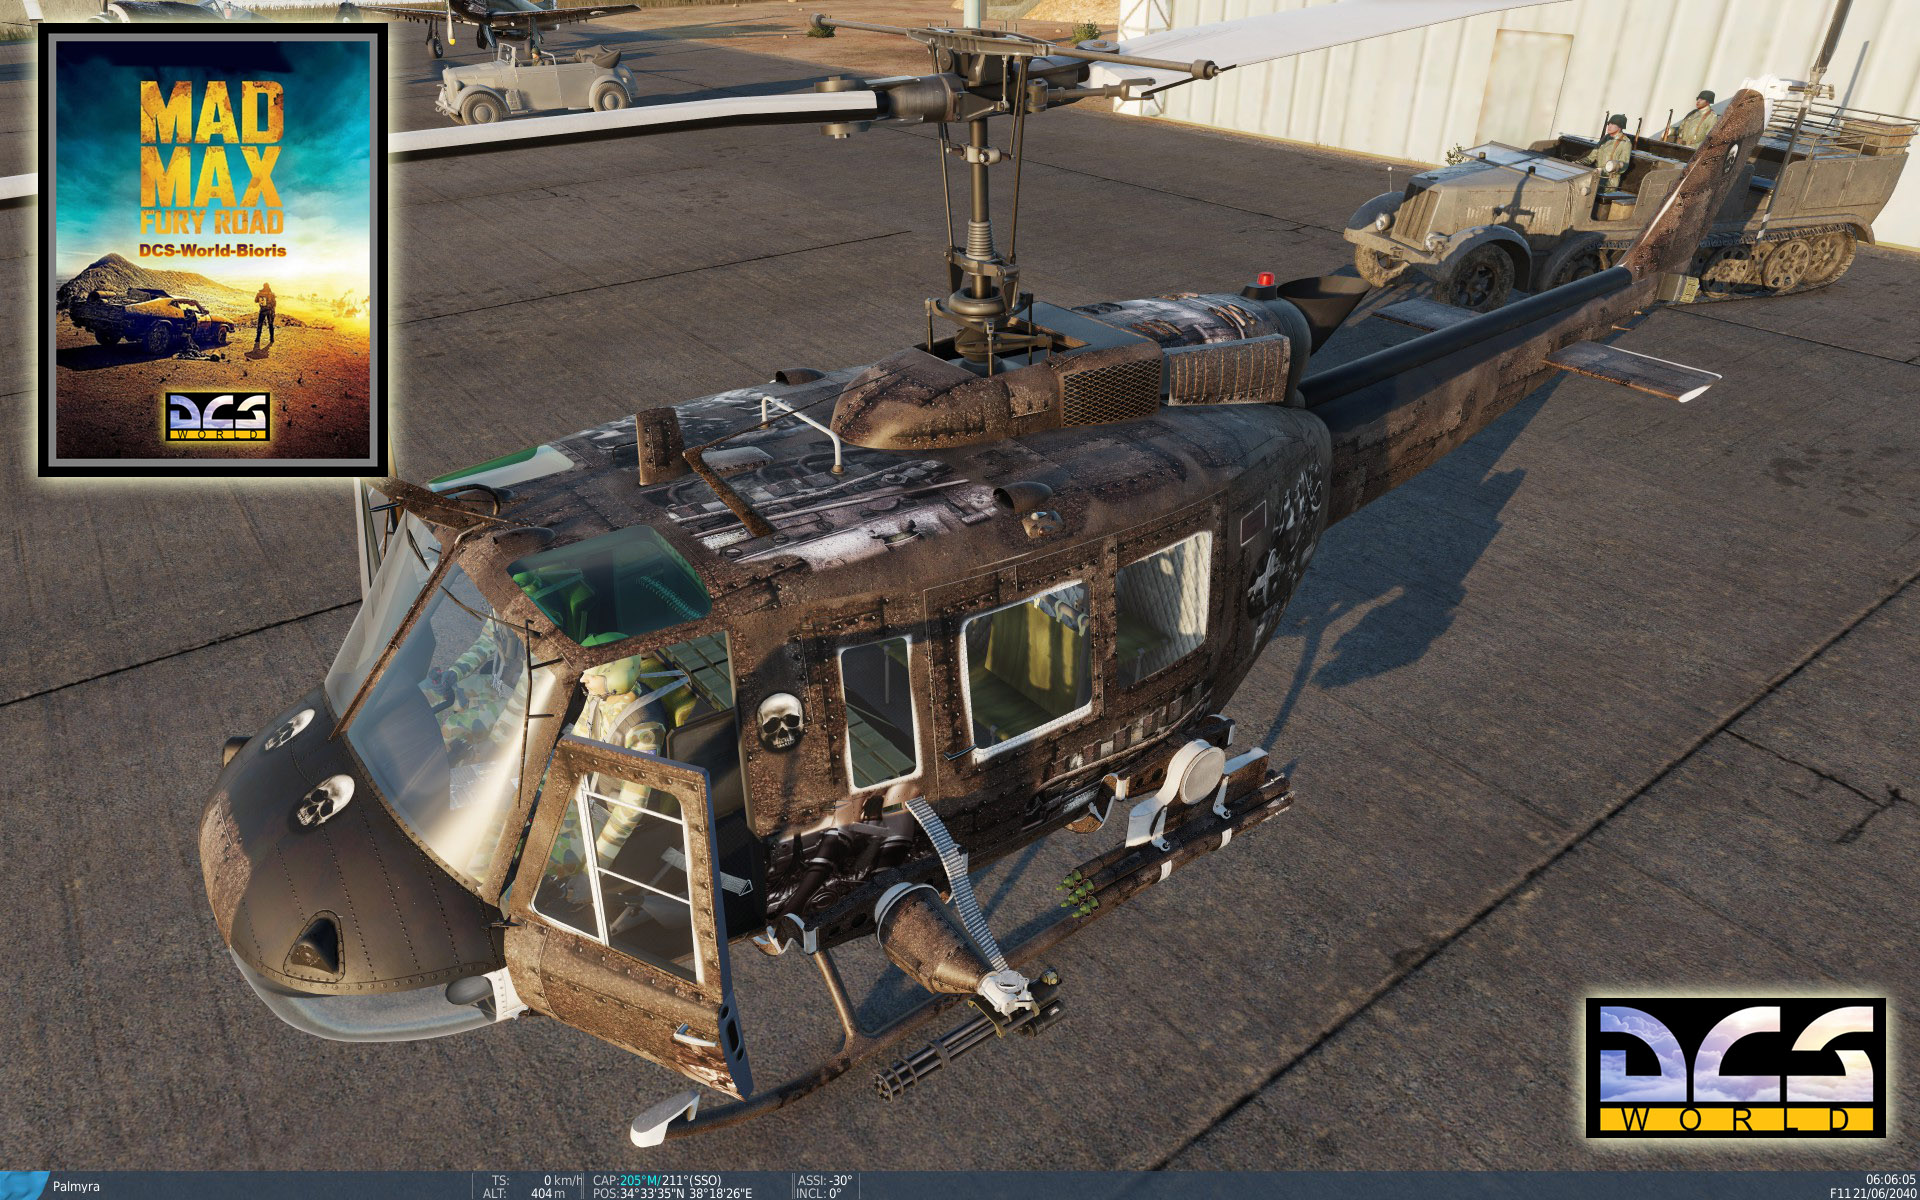 Huey MAD MAX Skin for Mad Max Missions